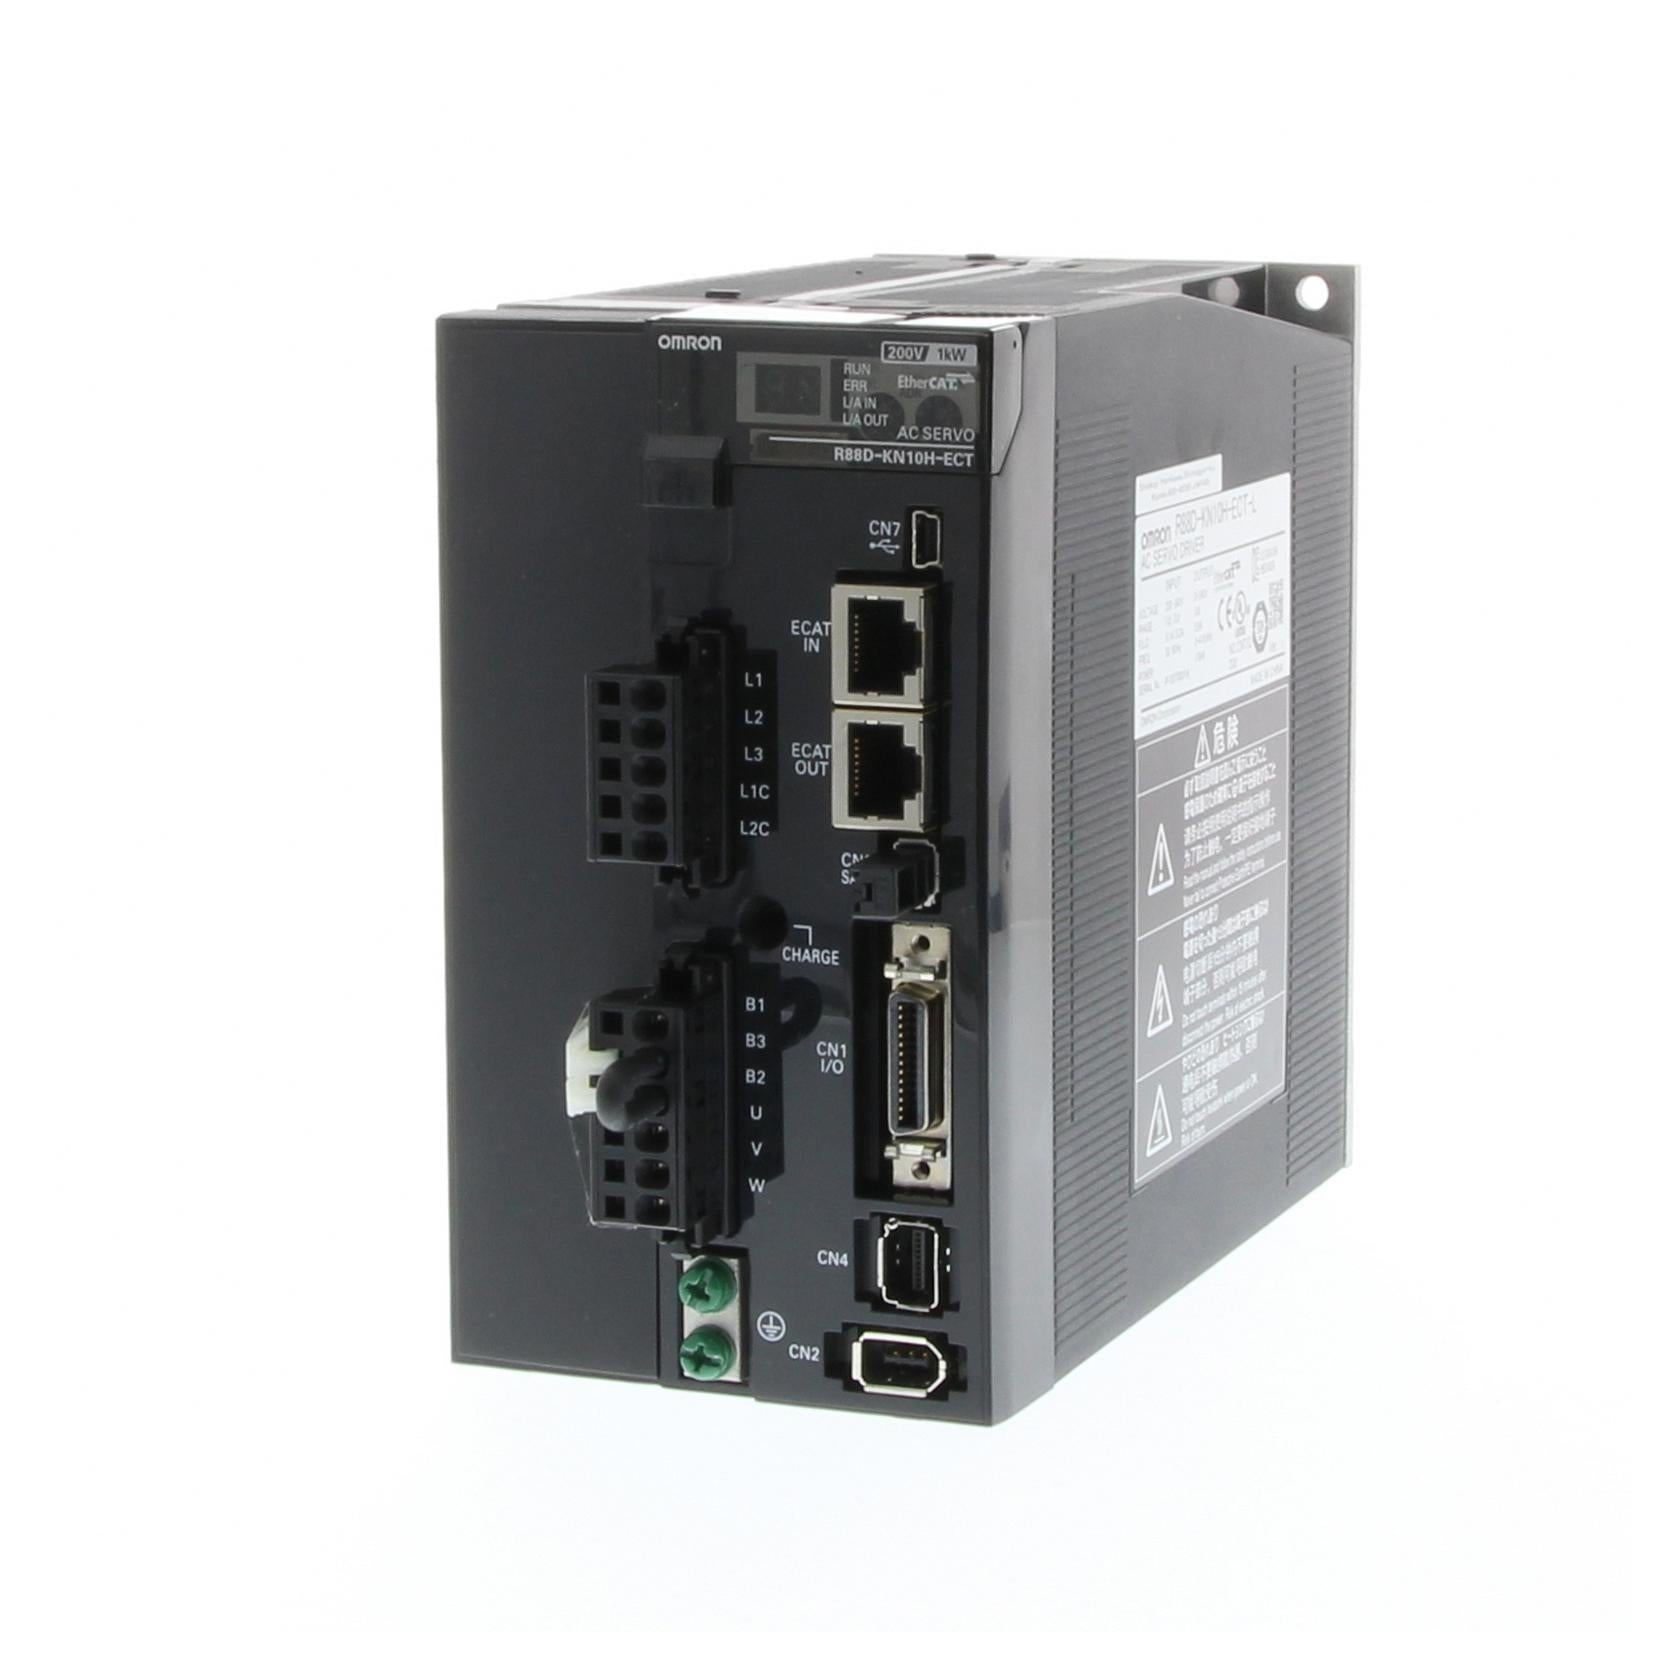 R88D-KN10H-ECT-L AC MOTOR SPEED CONTROLLERS OMRON